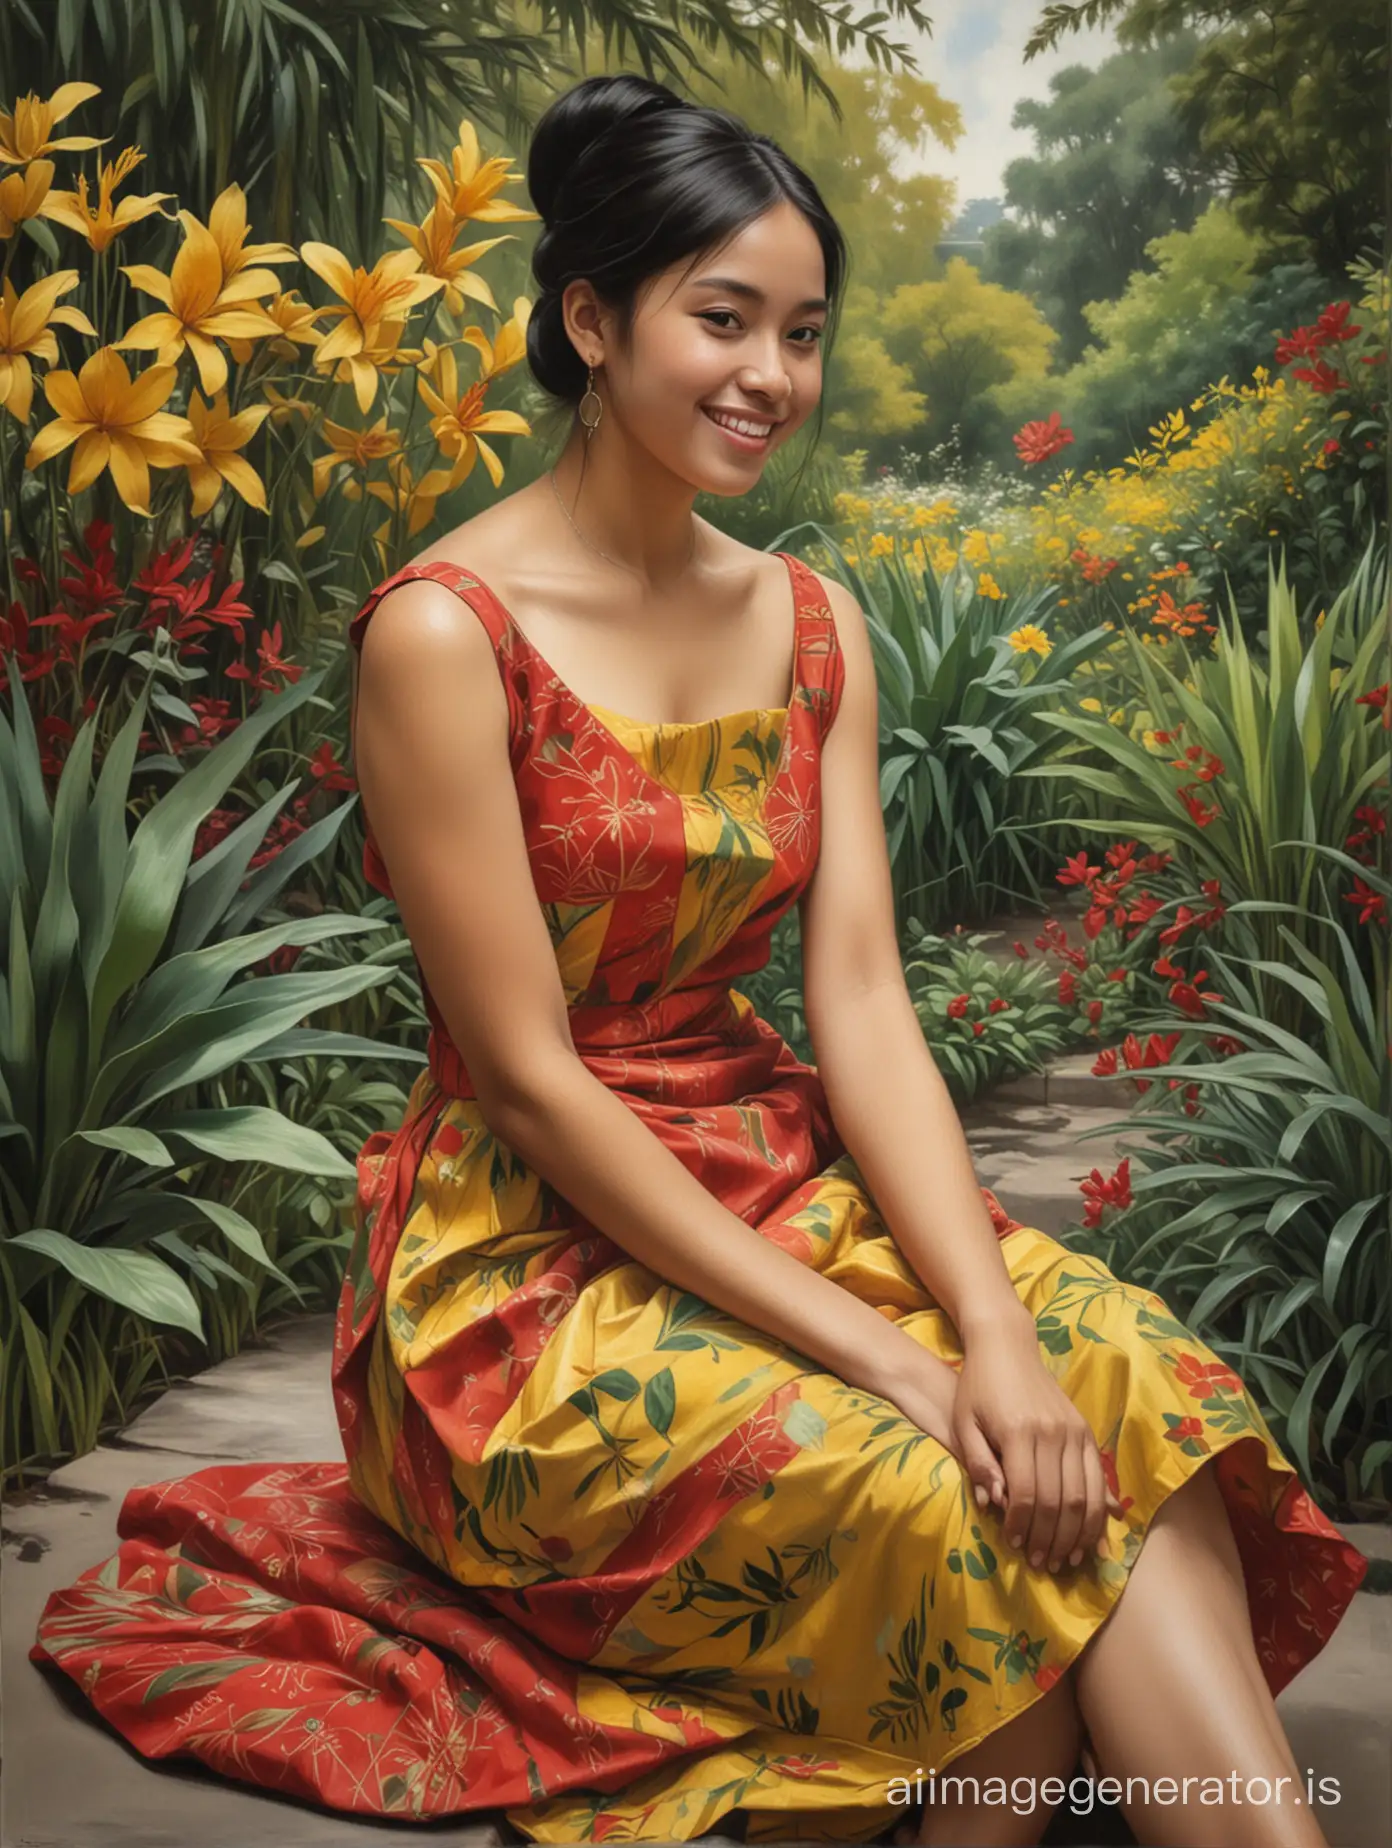 degas Oil painting styled trendy smiling, featuring a young nude Indonesian woman with a round face, straight black hair cascading, wearing a red geometric dress, sitting in a yellow & green botanical garden, with dark academic decoration, dark cottagecore, gloomy aesthetic, magical realism, dark earthy colors, charcoal grey